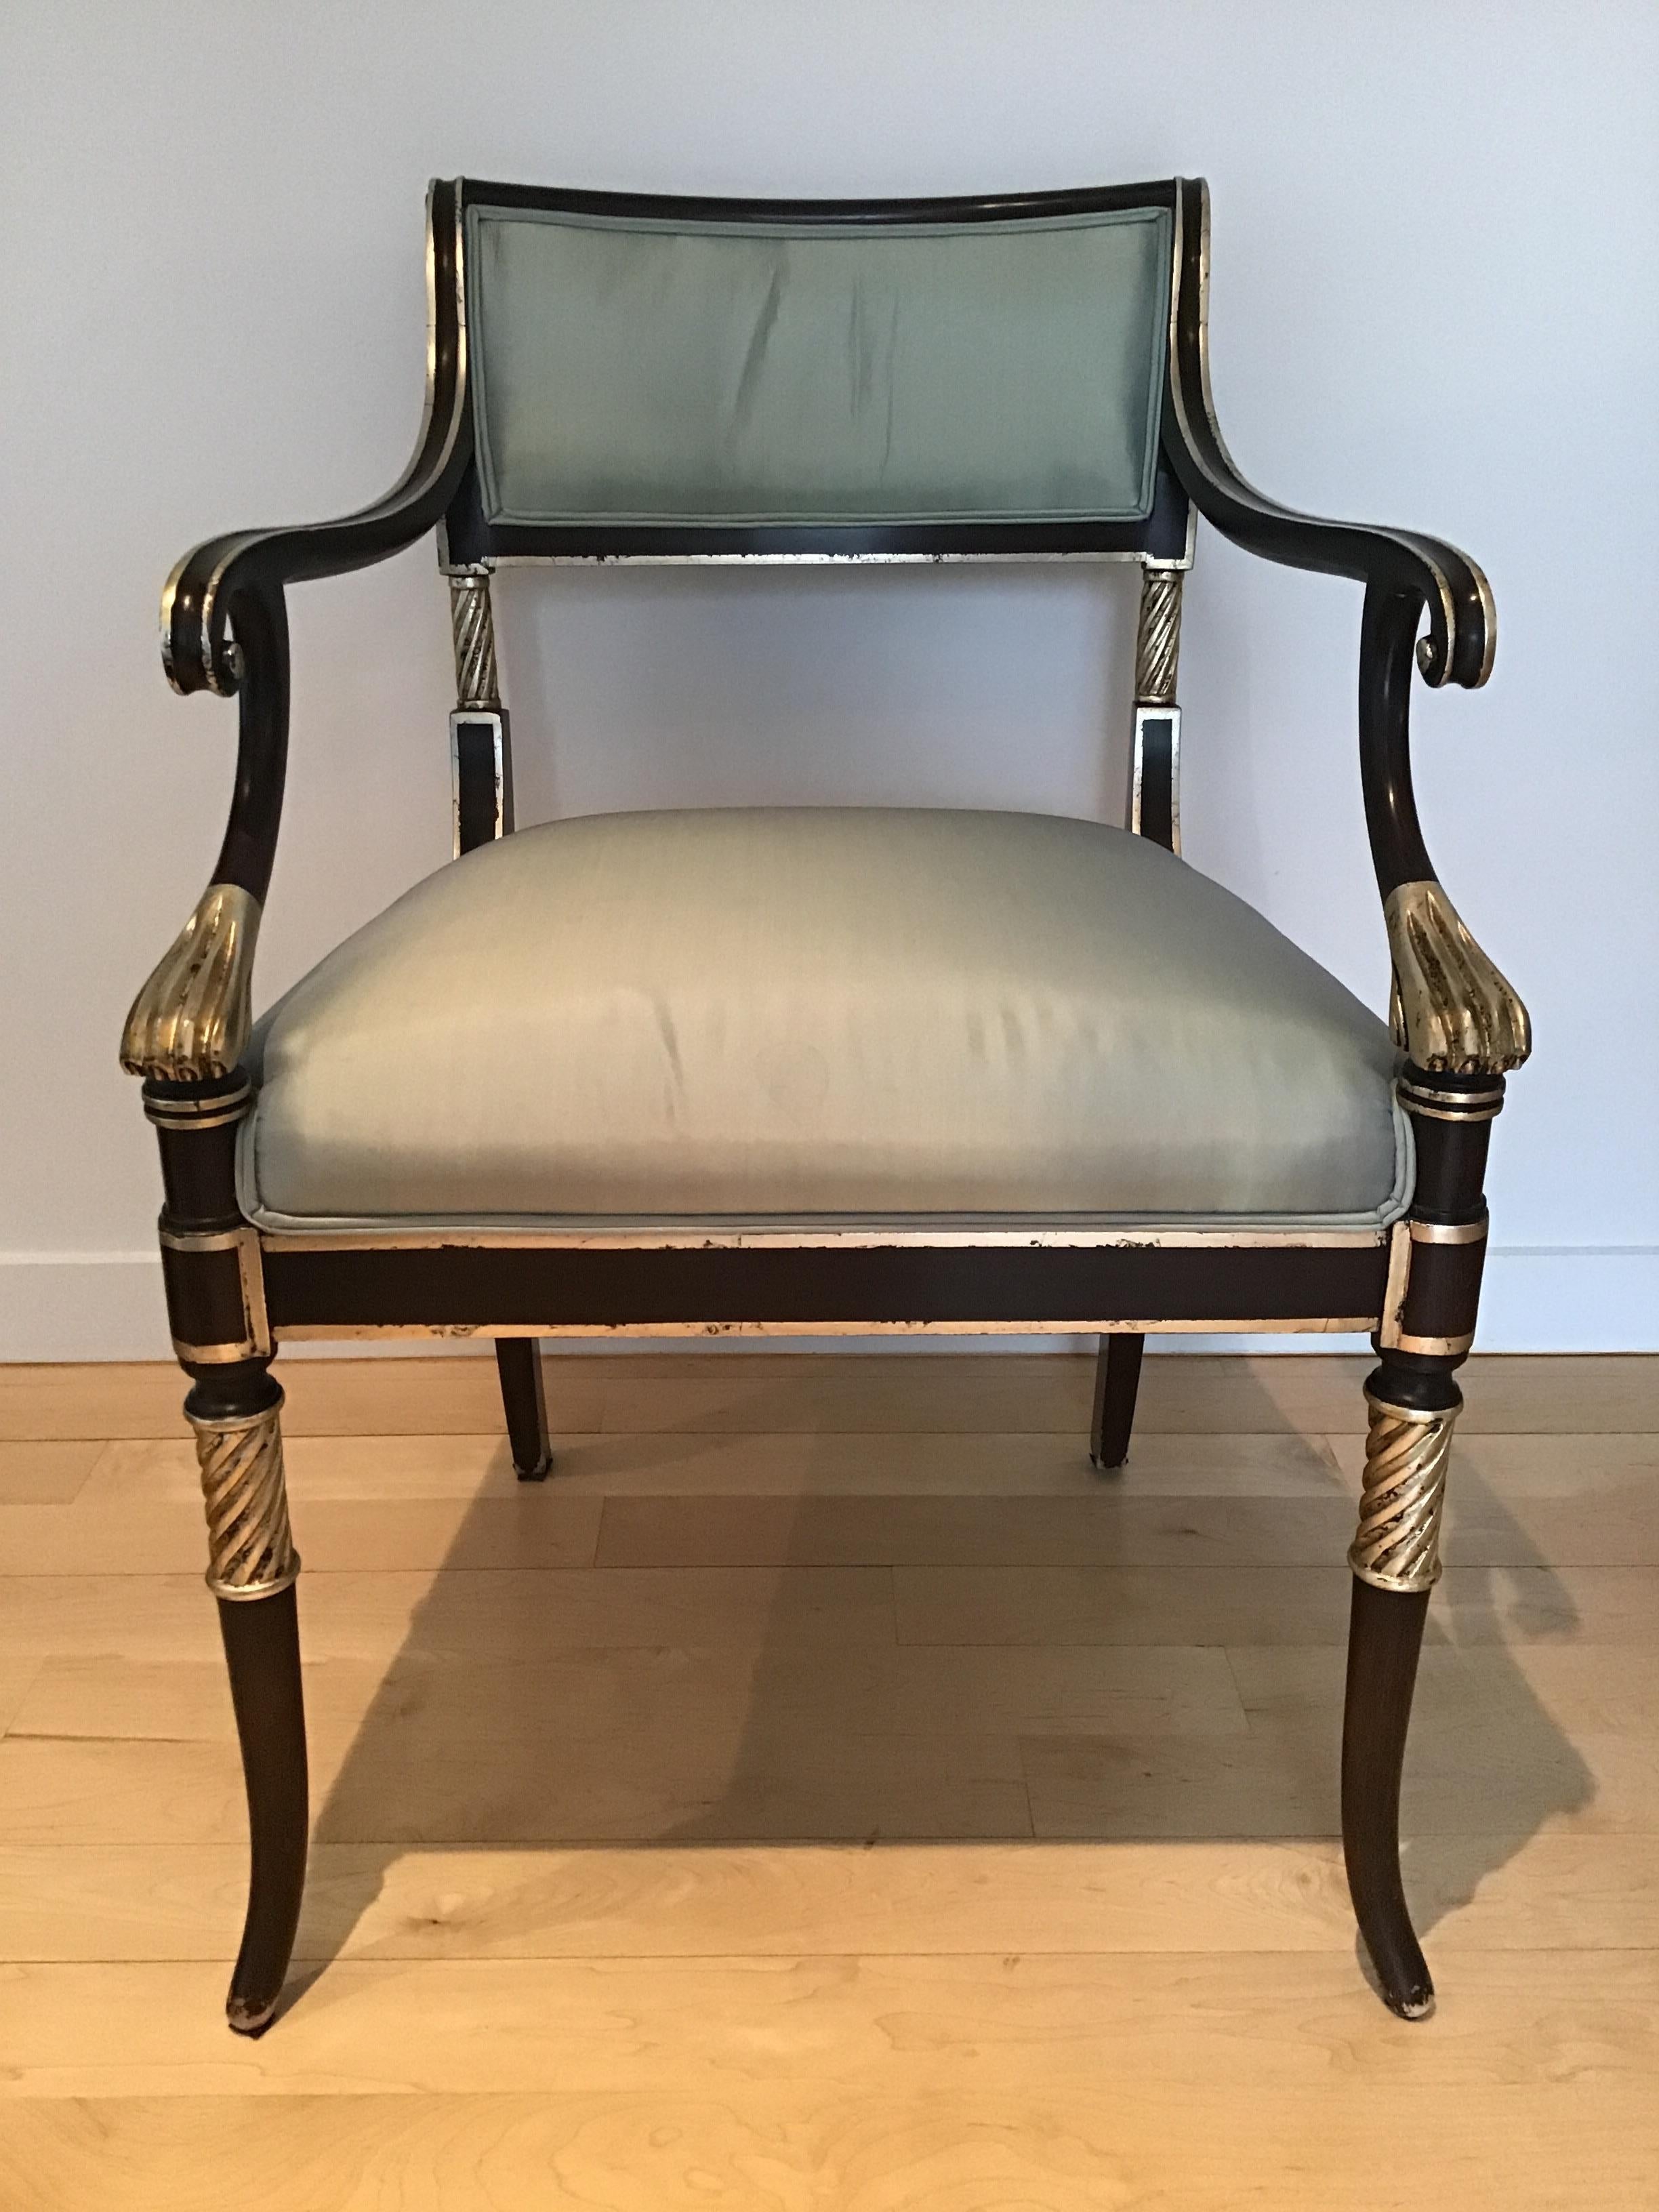 Pair of Regency style Karges armchairs .Silver leaf details. Caned back. Stains on fabric.